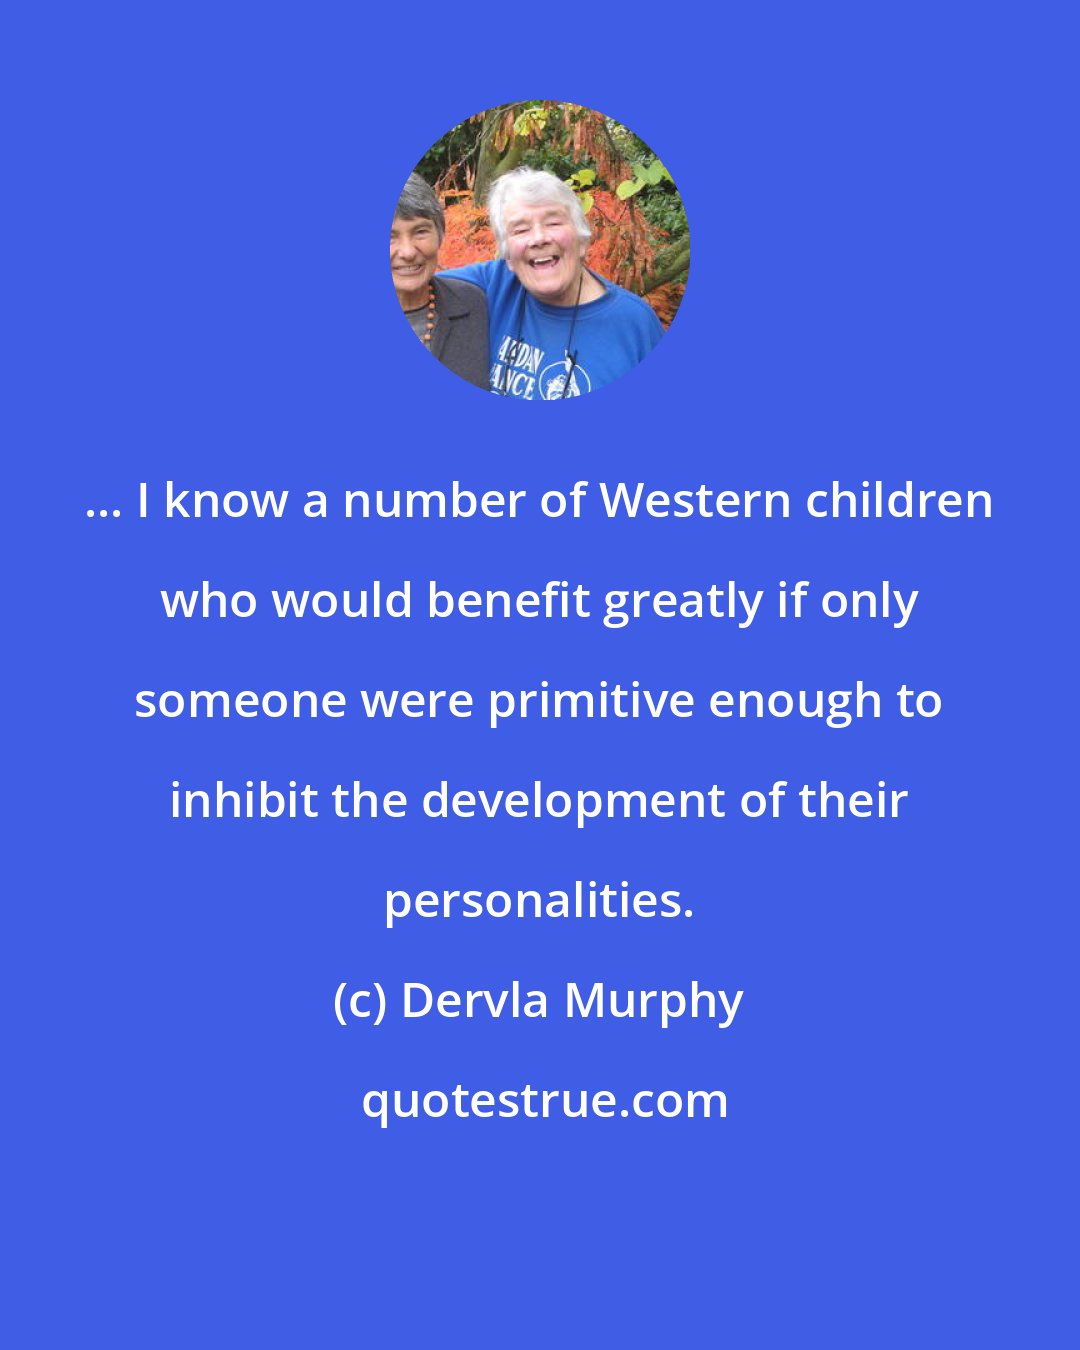 Dervla Murphy: ... I know a number of Western children who would benefit greatly if only someone were primitive enough to inhibit the development of their personalities.